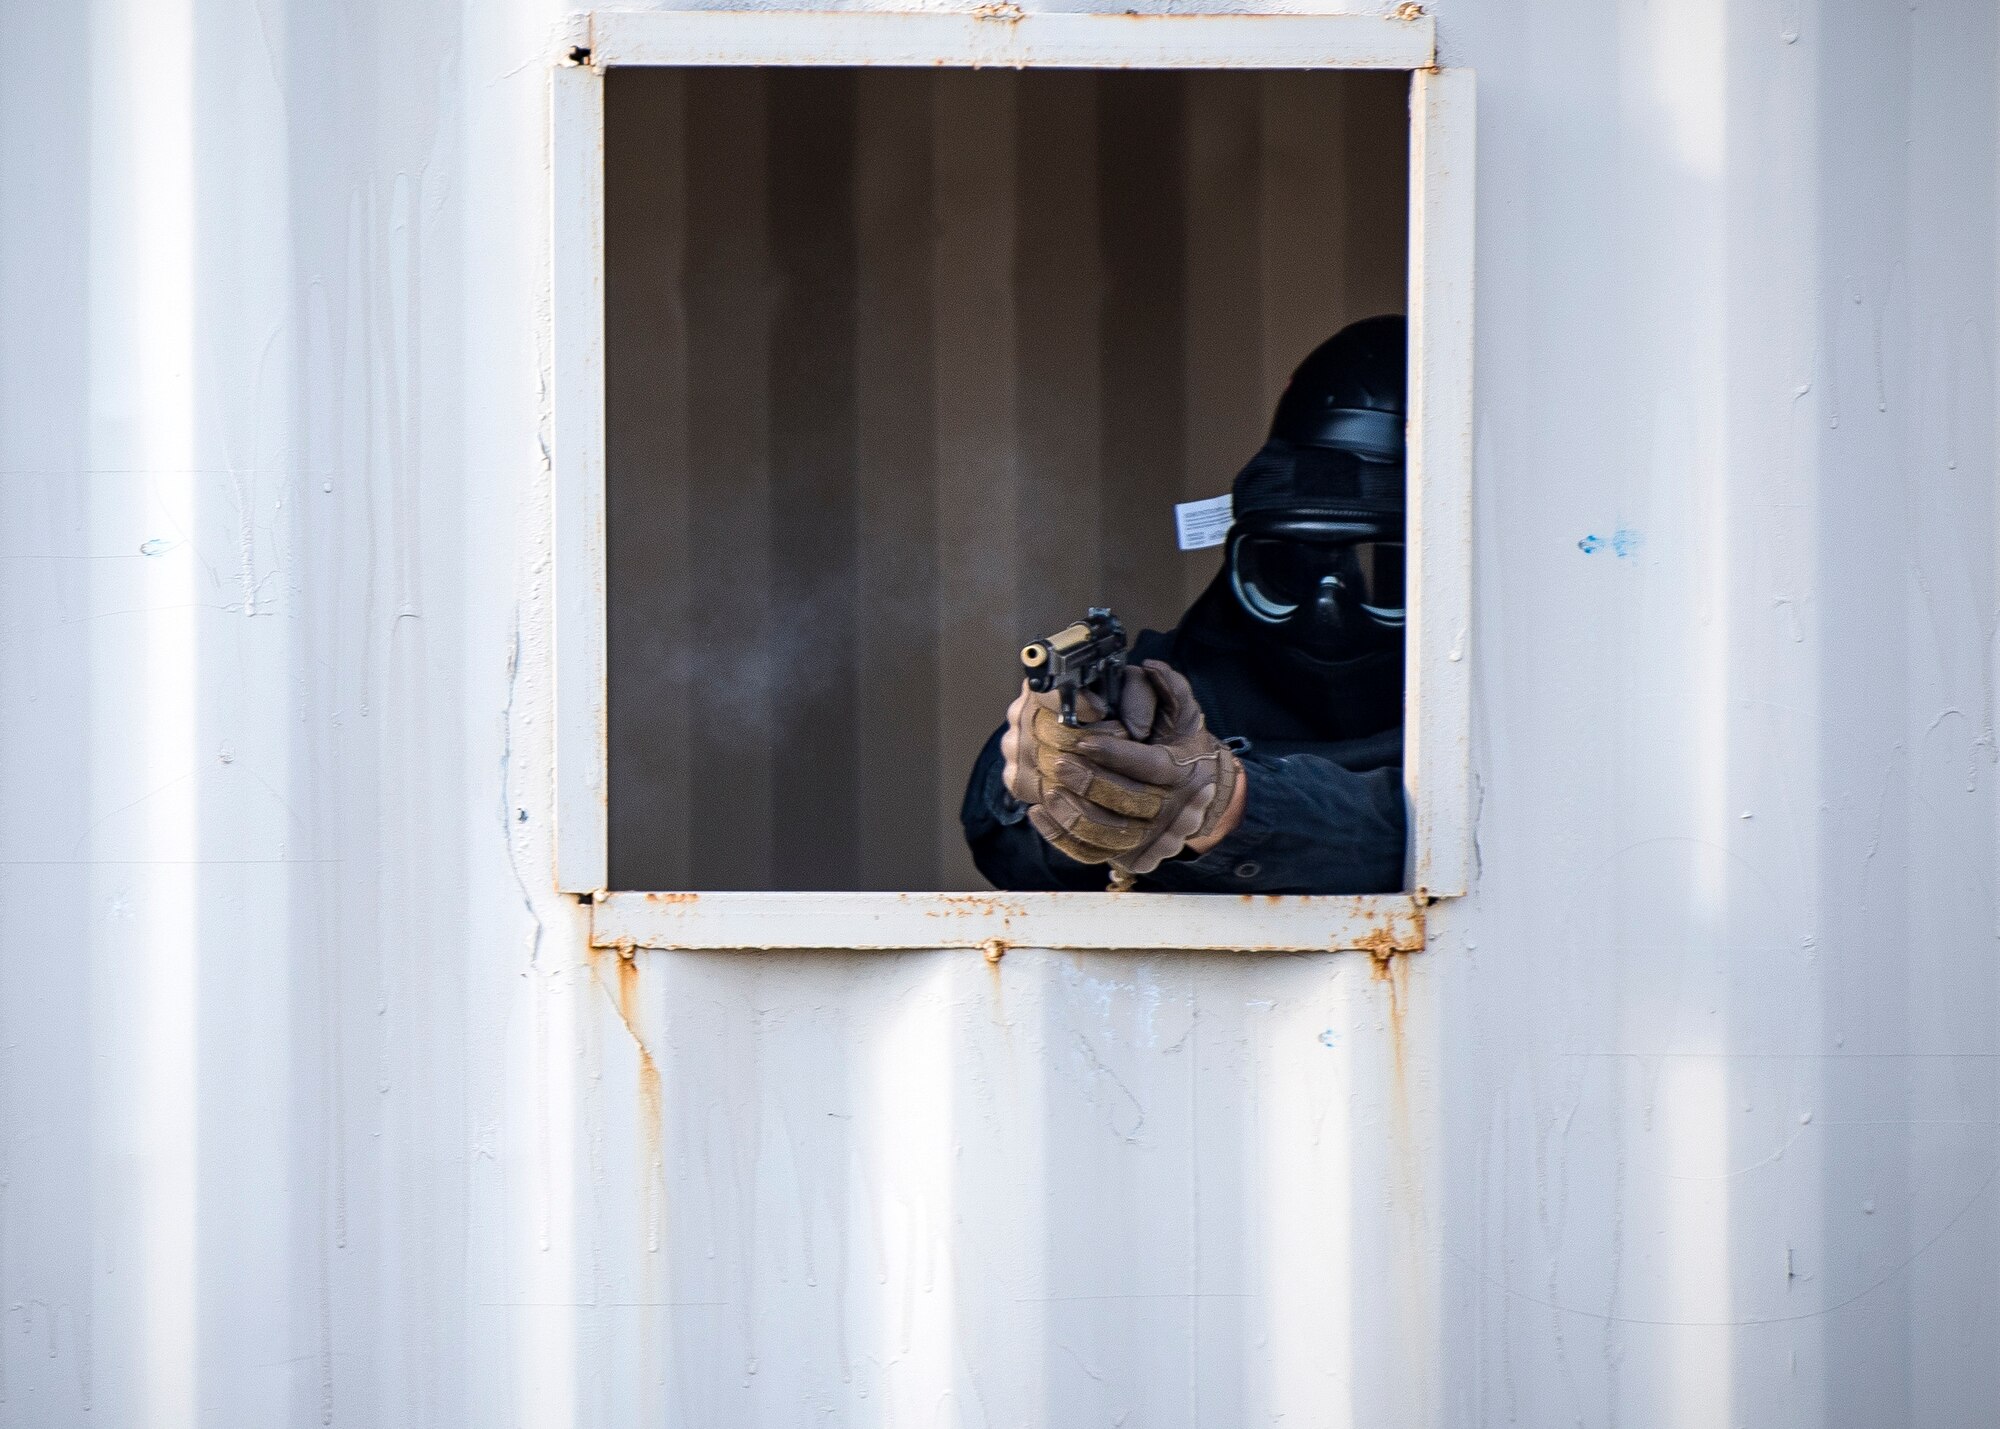 A Staff Weather Officer from the 3d Weather Squadron, fires an M9 pistol during a certification field exercise (CFX), July 29, 2019, at Camp Bowie Training Center, Texas. The CFX was designed to evaluate the squadron’s overall tactical ability and readiness to provide the U.S. Army with full spectrum environmental support to the Joint Task Force (JTF) fight. The CFX immersed Airmen into all the aspects of what could come with a deployment such as force on force scenarios. (U.S. Air Force photo by Airman 1st Class Eugene Oliver)